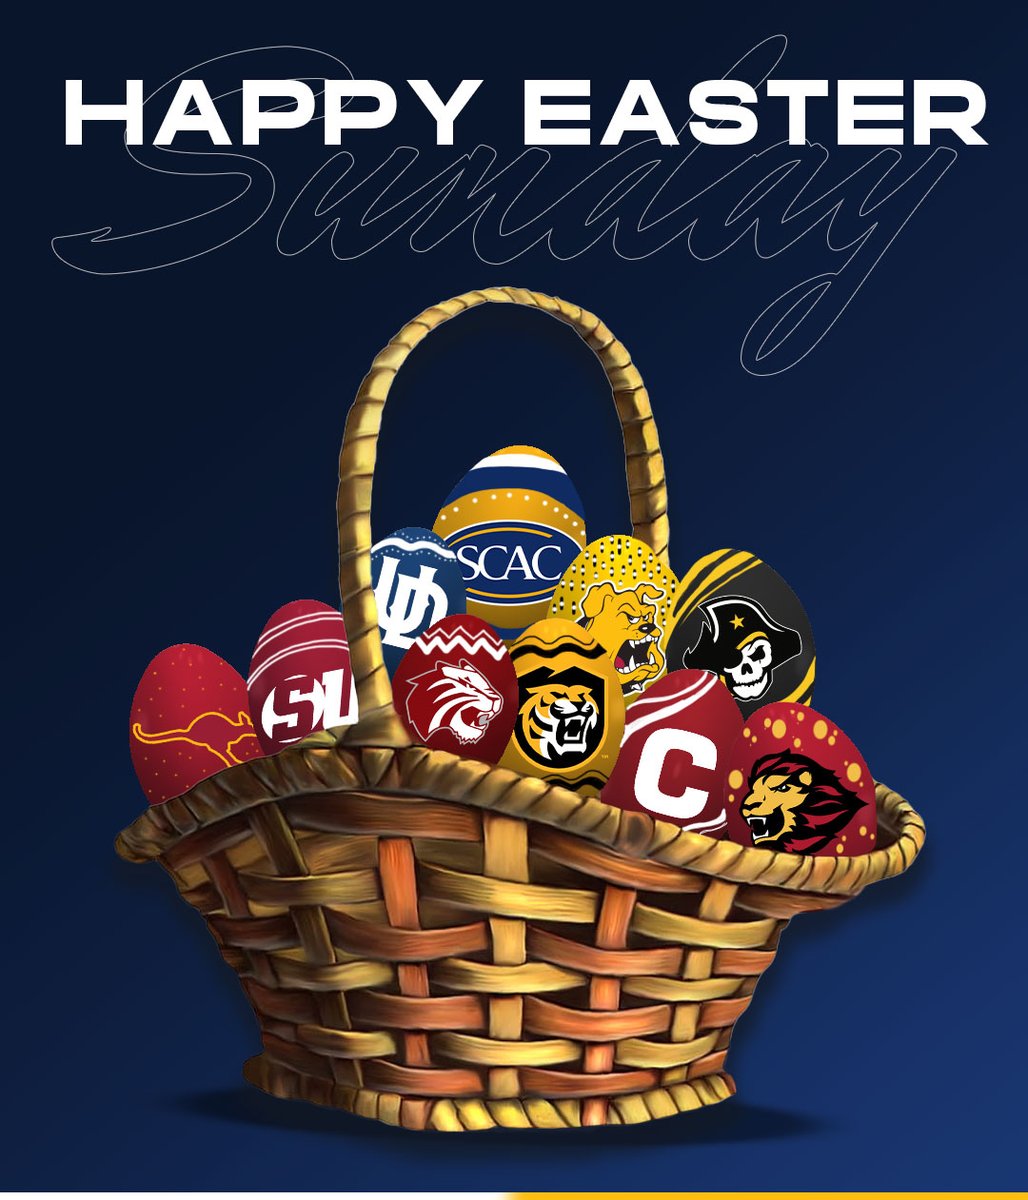 From us here at the #SCAC to all who celebrate, a #HappyEaster.